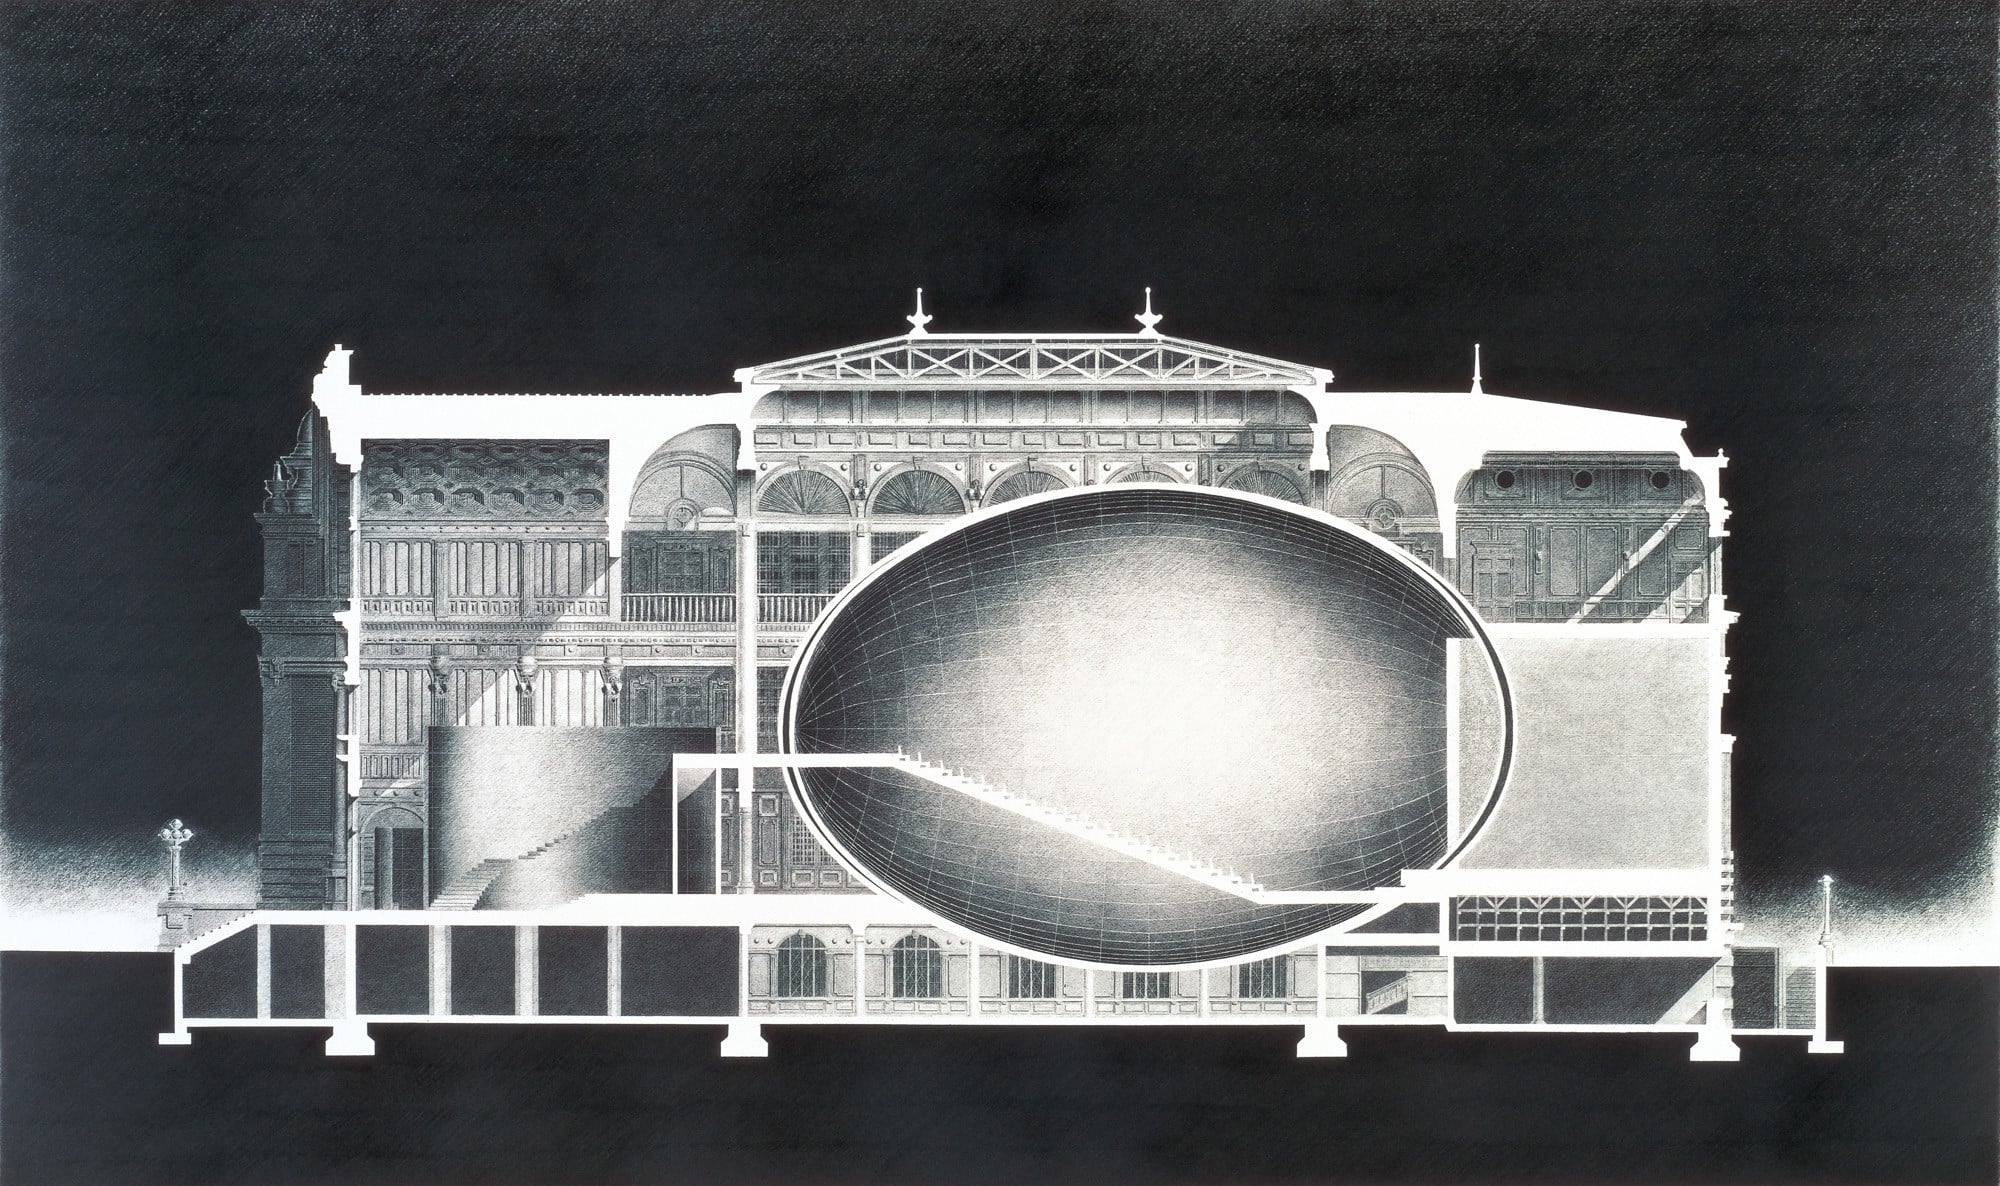  The drawing of Ando’s proposal for the Nakanoshima Project II (Urban Egg). An egg shaped hall can be seen inside the Osaka City Central Public Hall. © TADAO ANDO ARCHITECT & ASSOCIATES